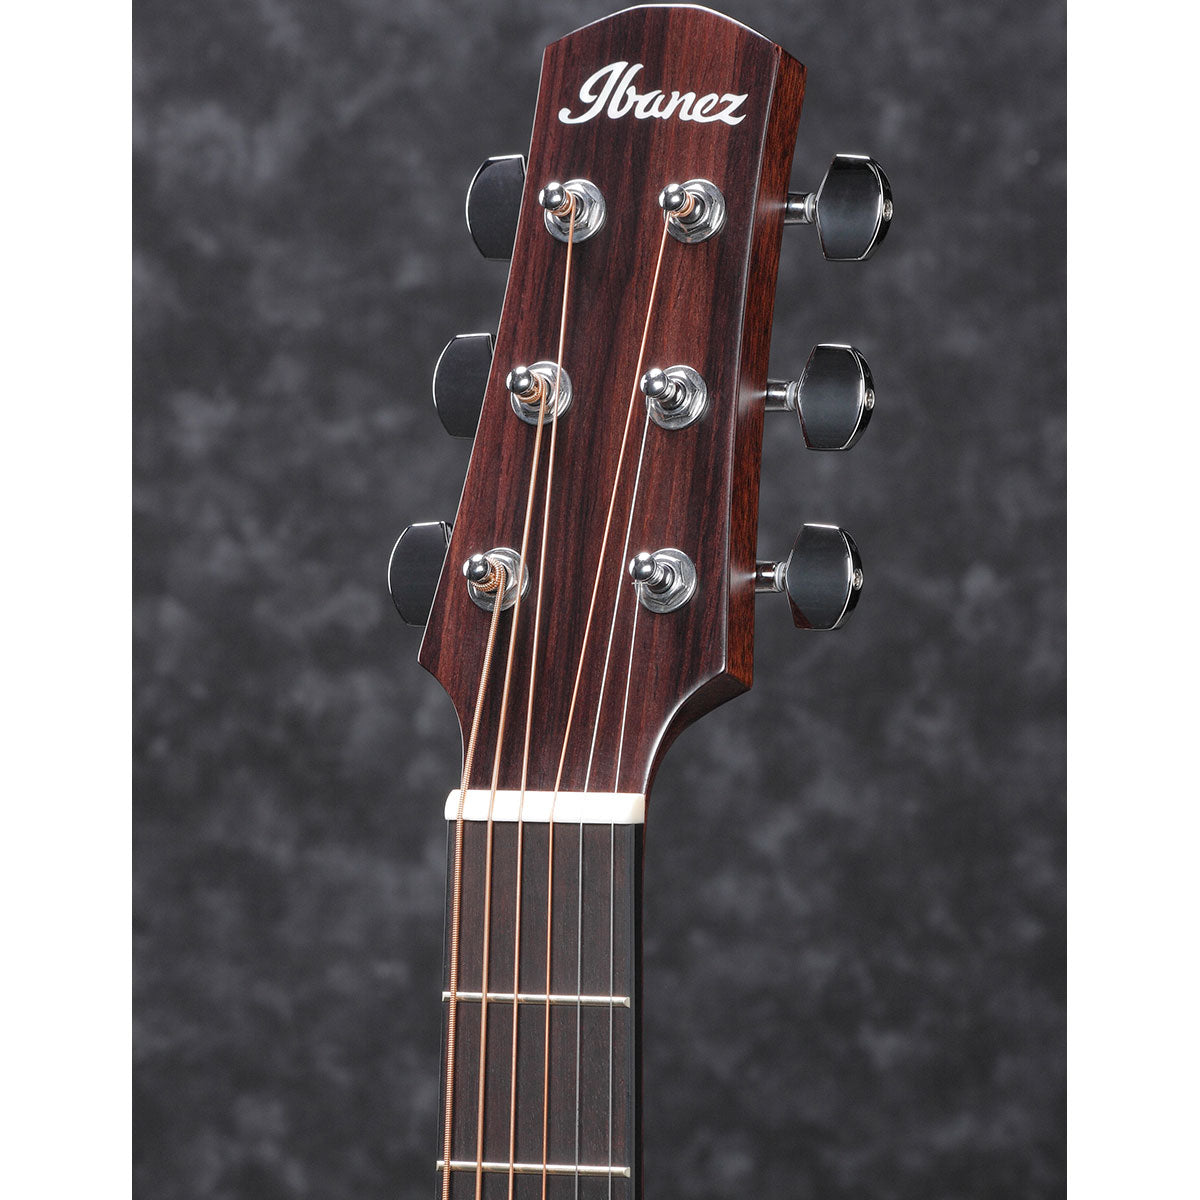 Detail view of Ibanez AAD140 Acoustic Guitar - Open Pore Natural showing top of headstock and portion of fingerboard